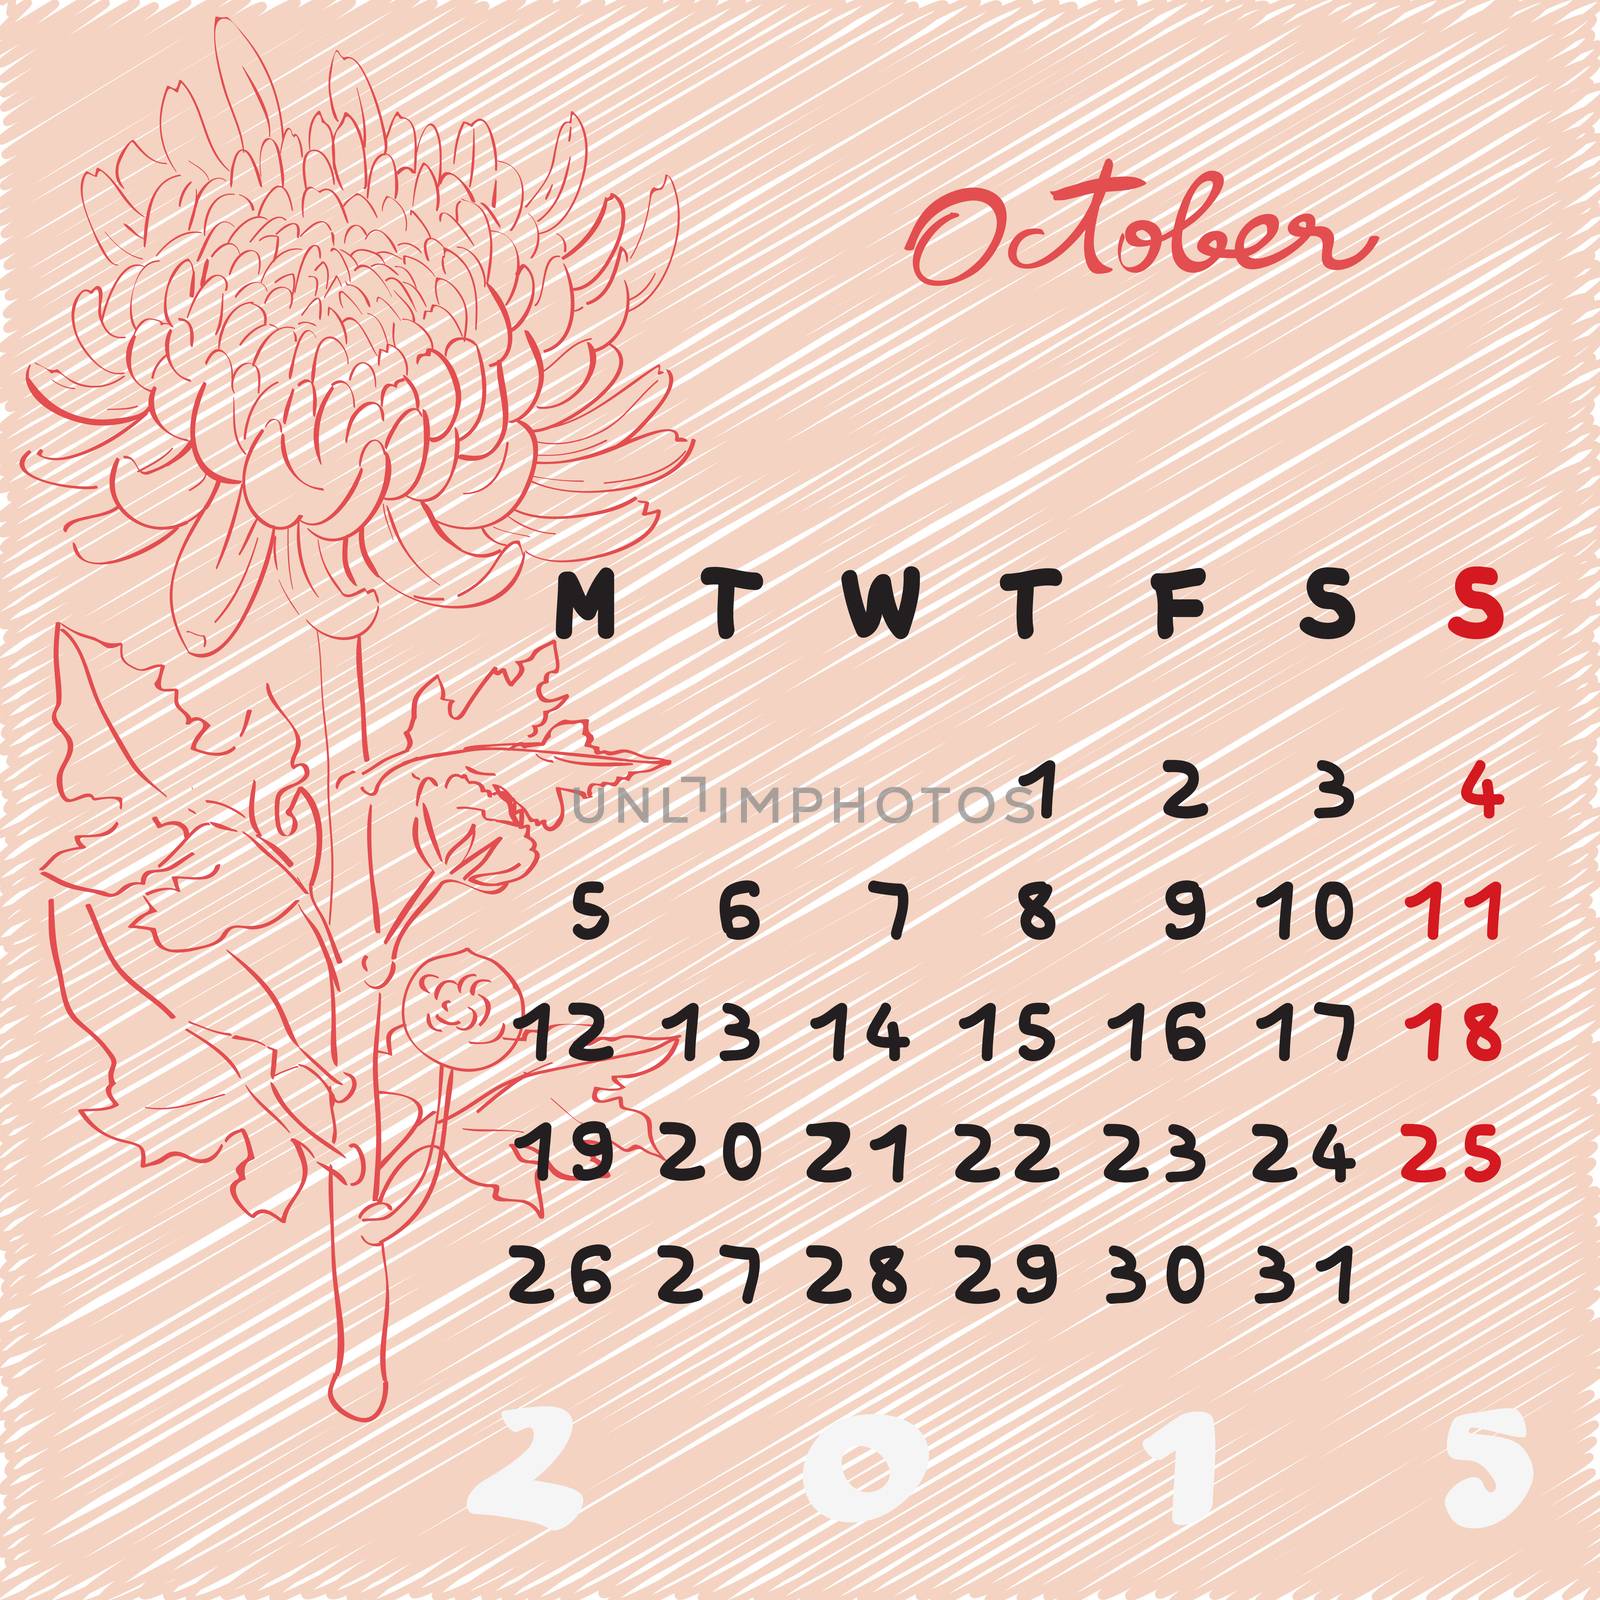 october 2015 flowers by catacos